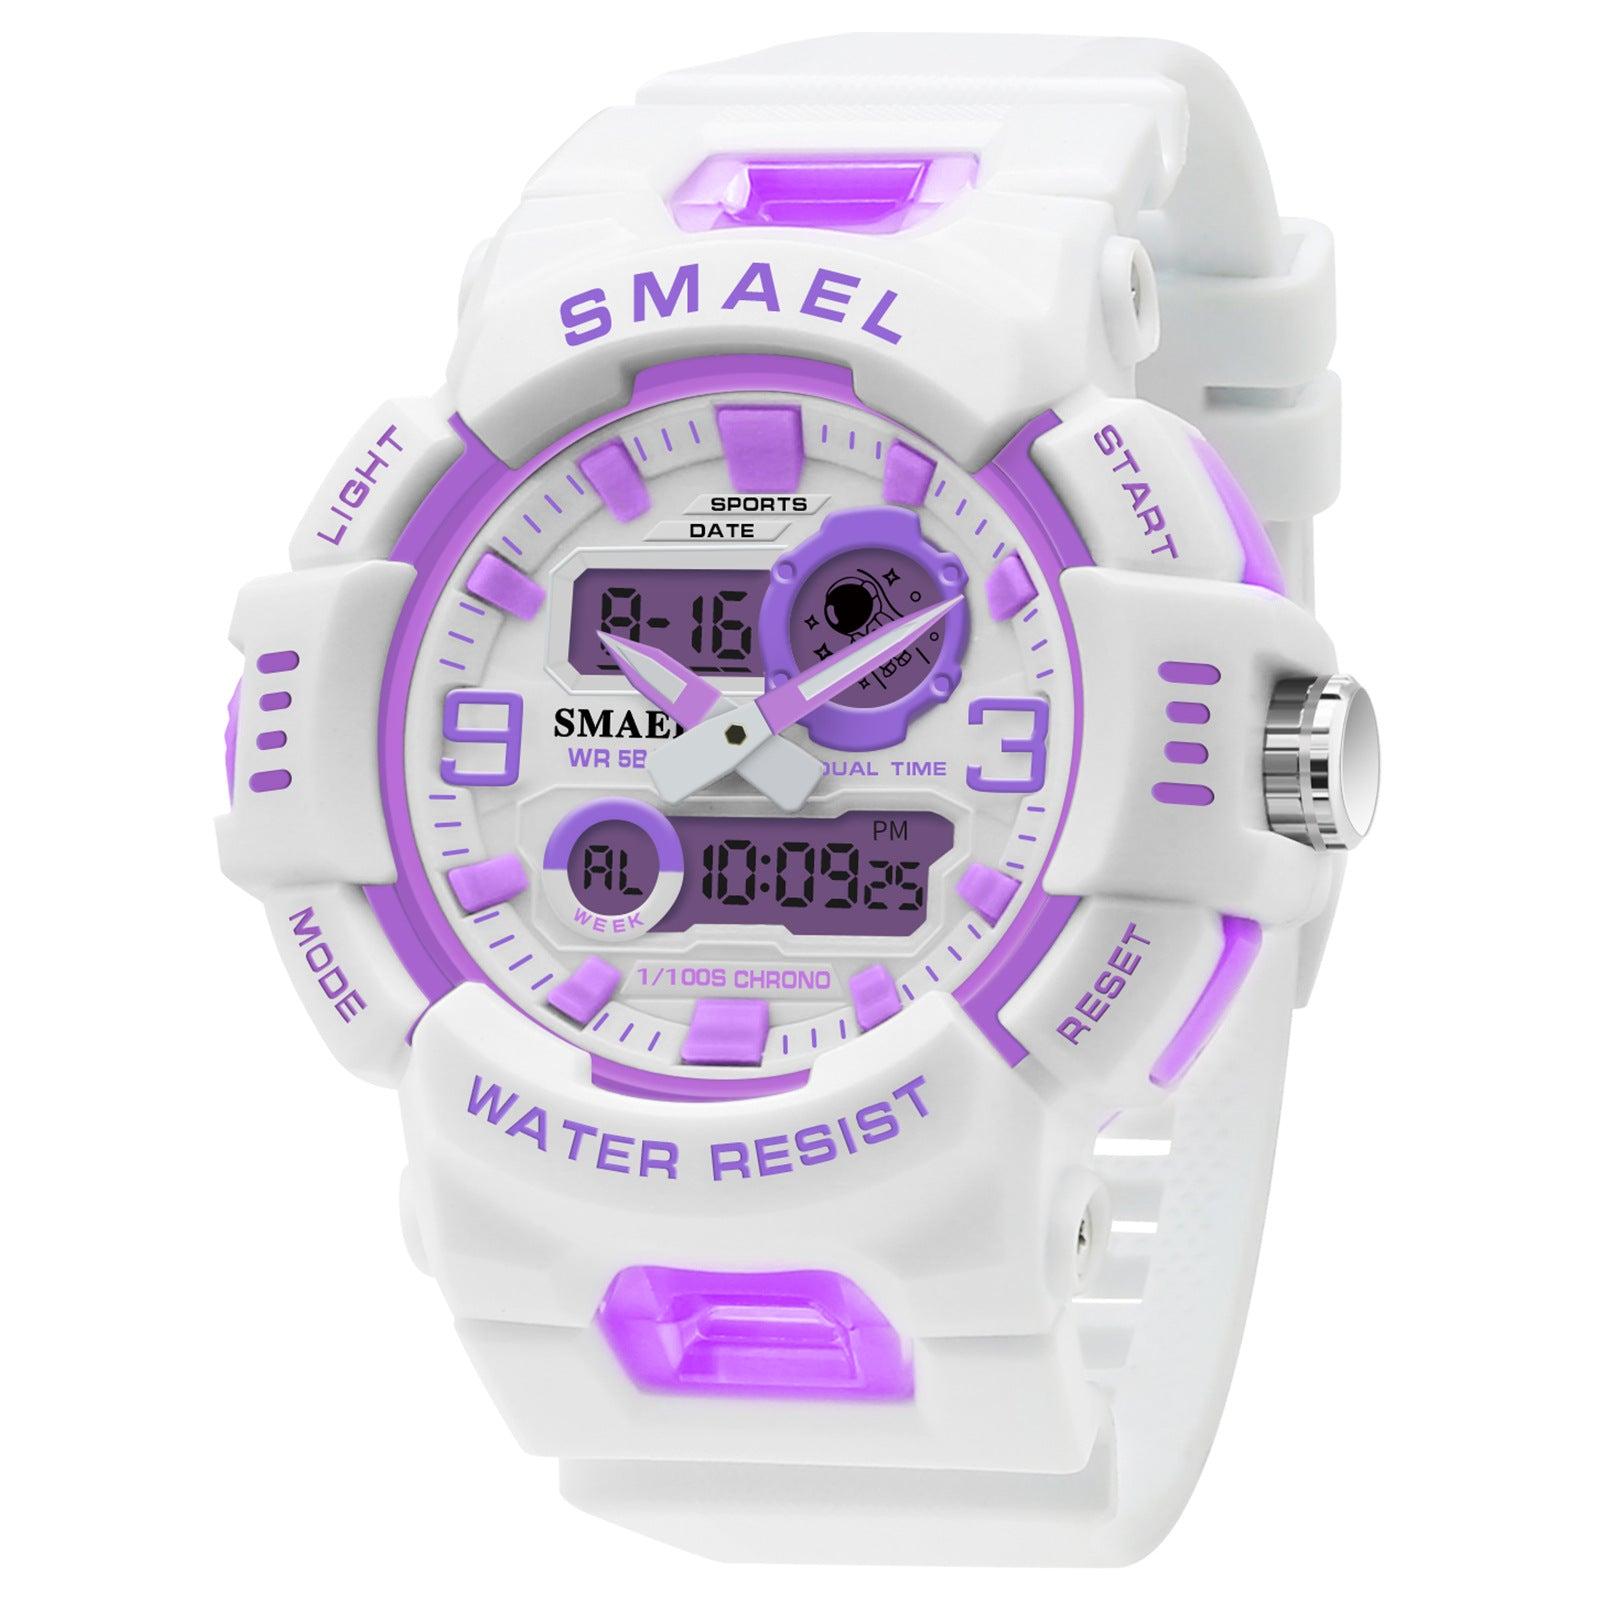 SMAEL Candy Color Sports Multifunctional Analog Digital Watch for men 8083 - Skmeico